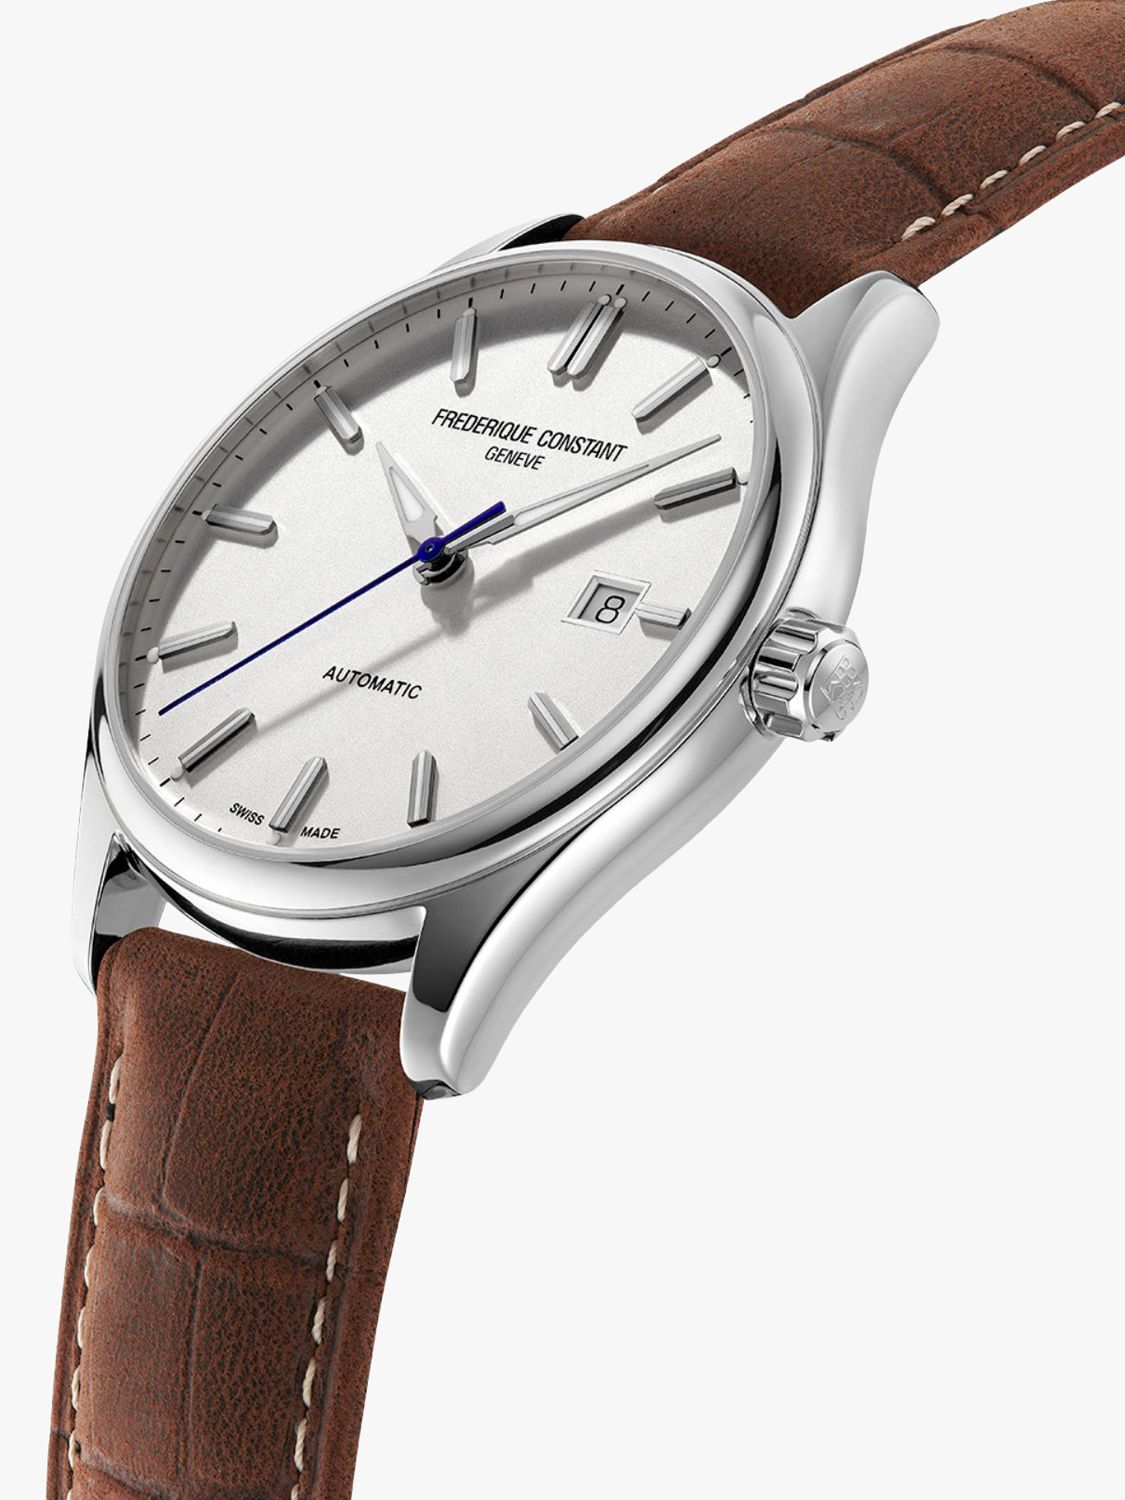 Buy Frederique Constant FC-303NS5B6 Men's Classics Index Automatic Date Leather Strap Watch, Brown/Silver Online at johnlewis.com